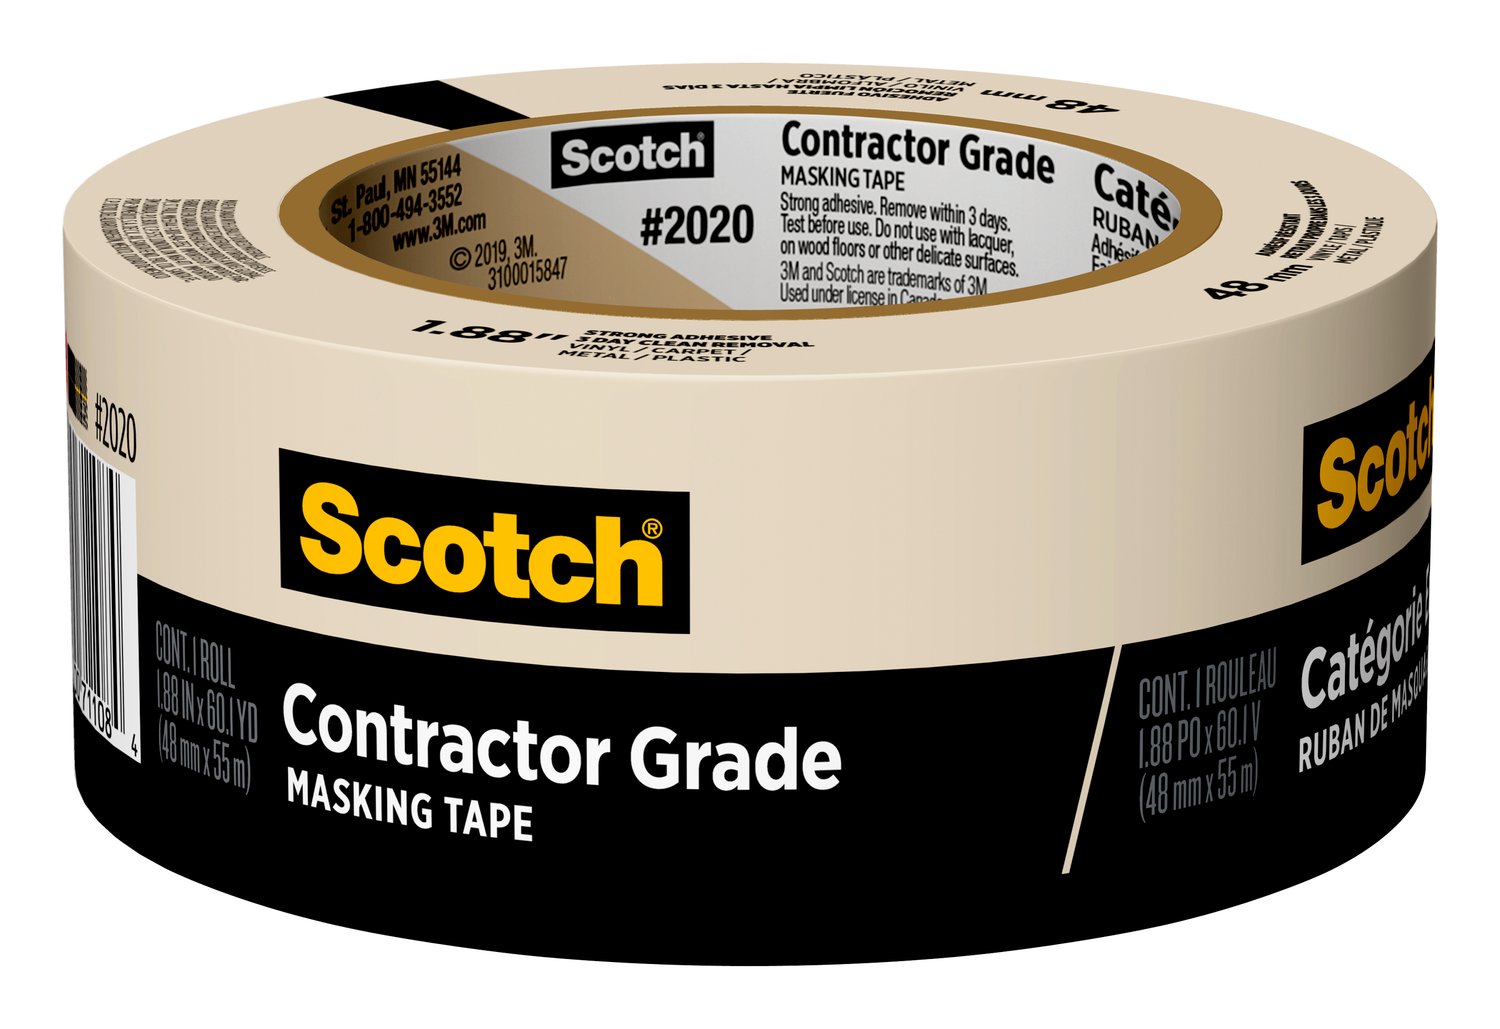 7100186424 - Scotch Contractor Grade Masking Tape 2020-48MP, 1.88 in x 60.1 yd (48mm
x 55m)